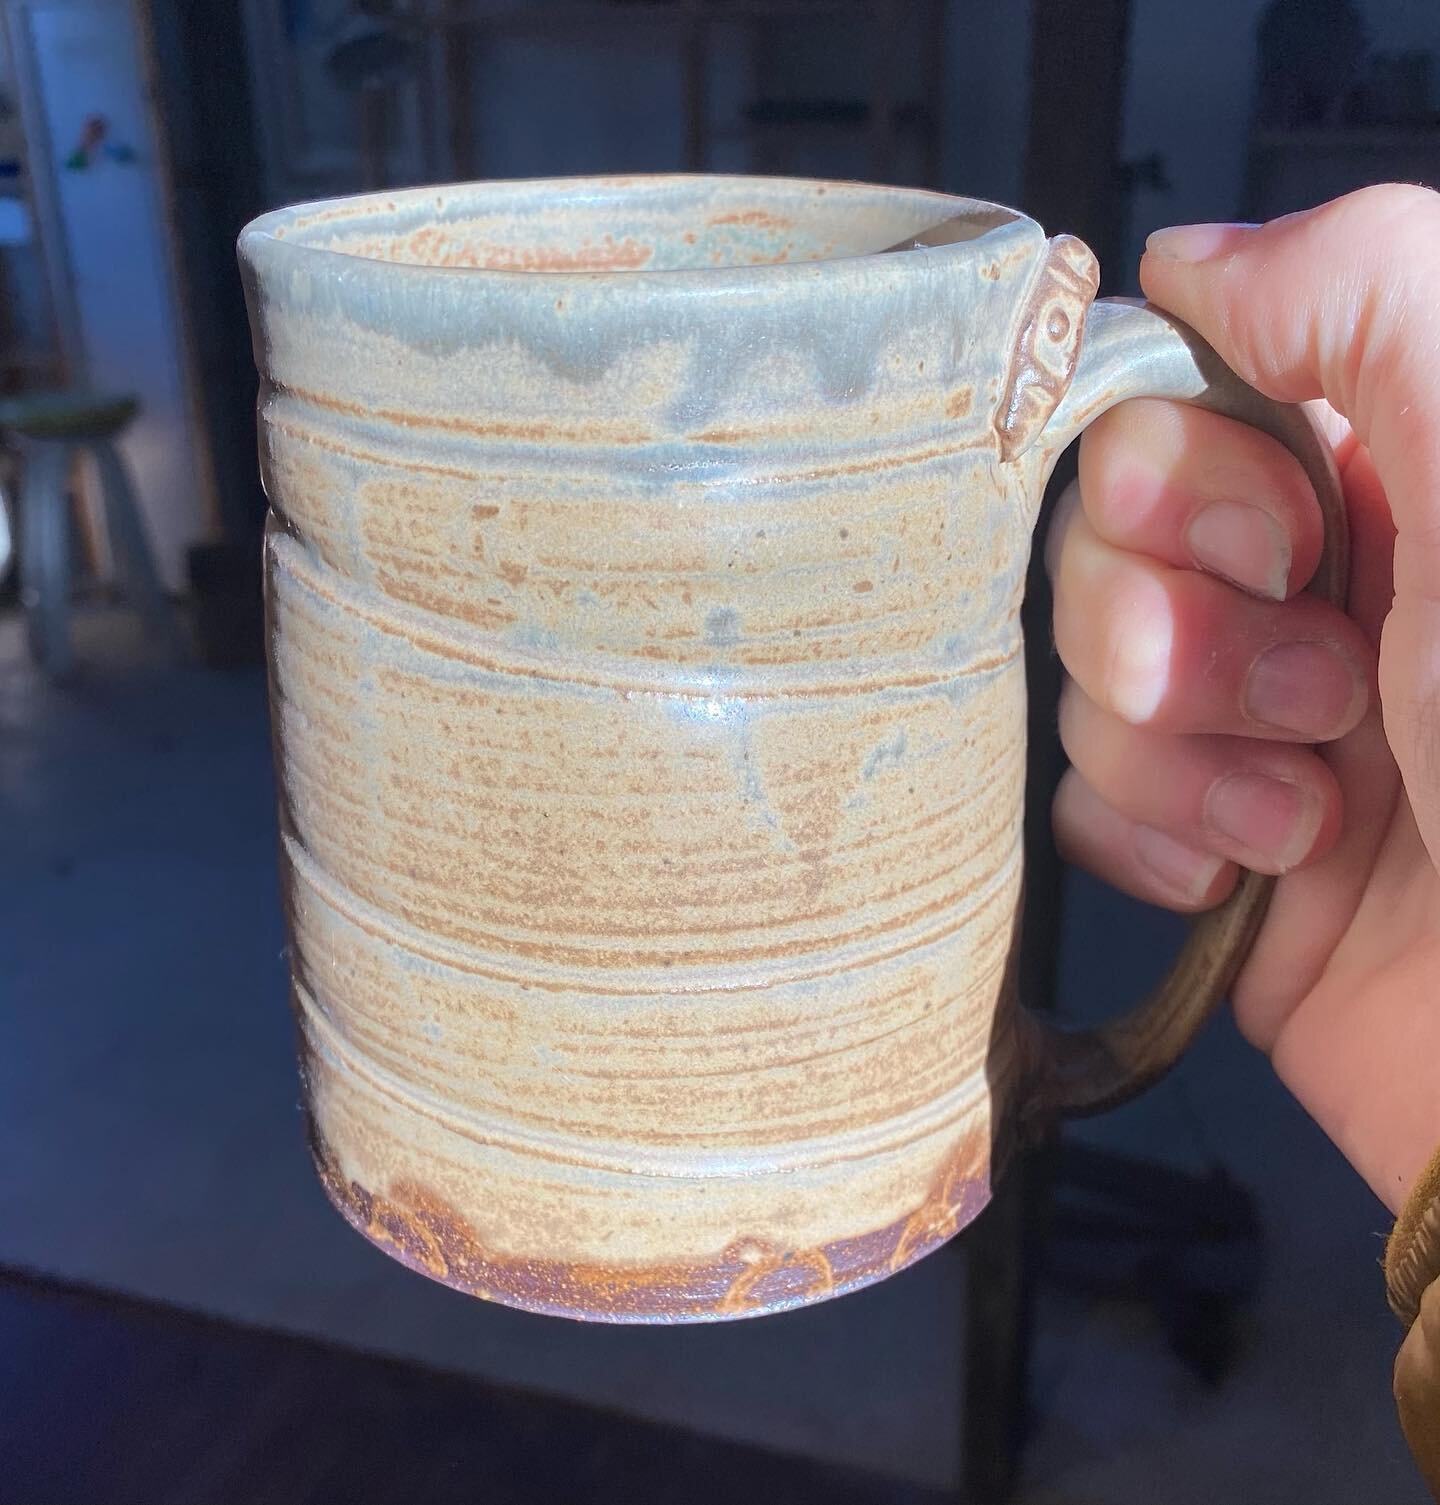 Mugshot Monday. From tea in the morning to beer in the evening - this large mugs work hard to keep you hydrated and happy. 

#mugshotmonday #handthrownpottery #stein #tea #hydrate #handmade #handmadepottery #handmademug